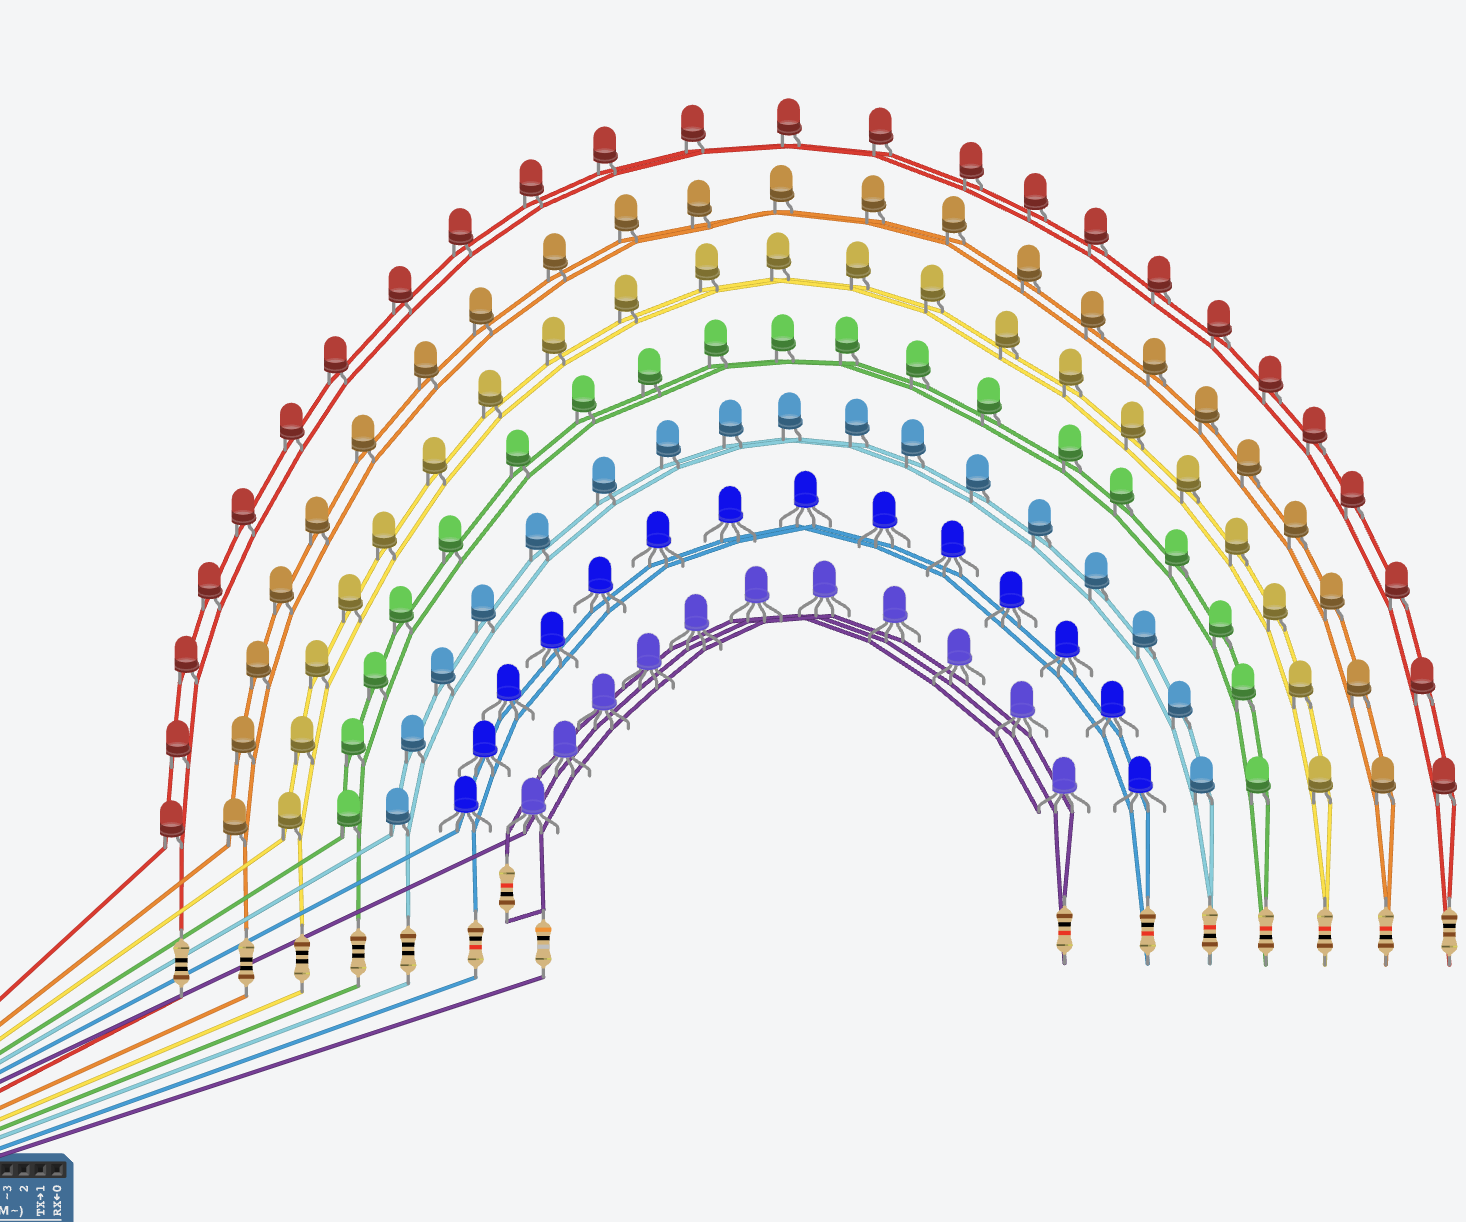 How to Create Rainbow With LEDs in TinkerCad